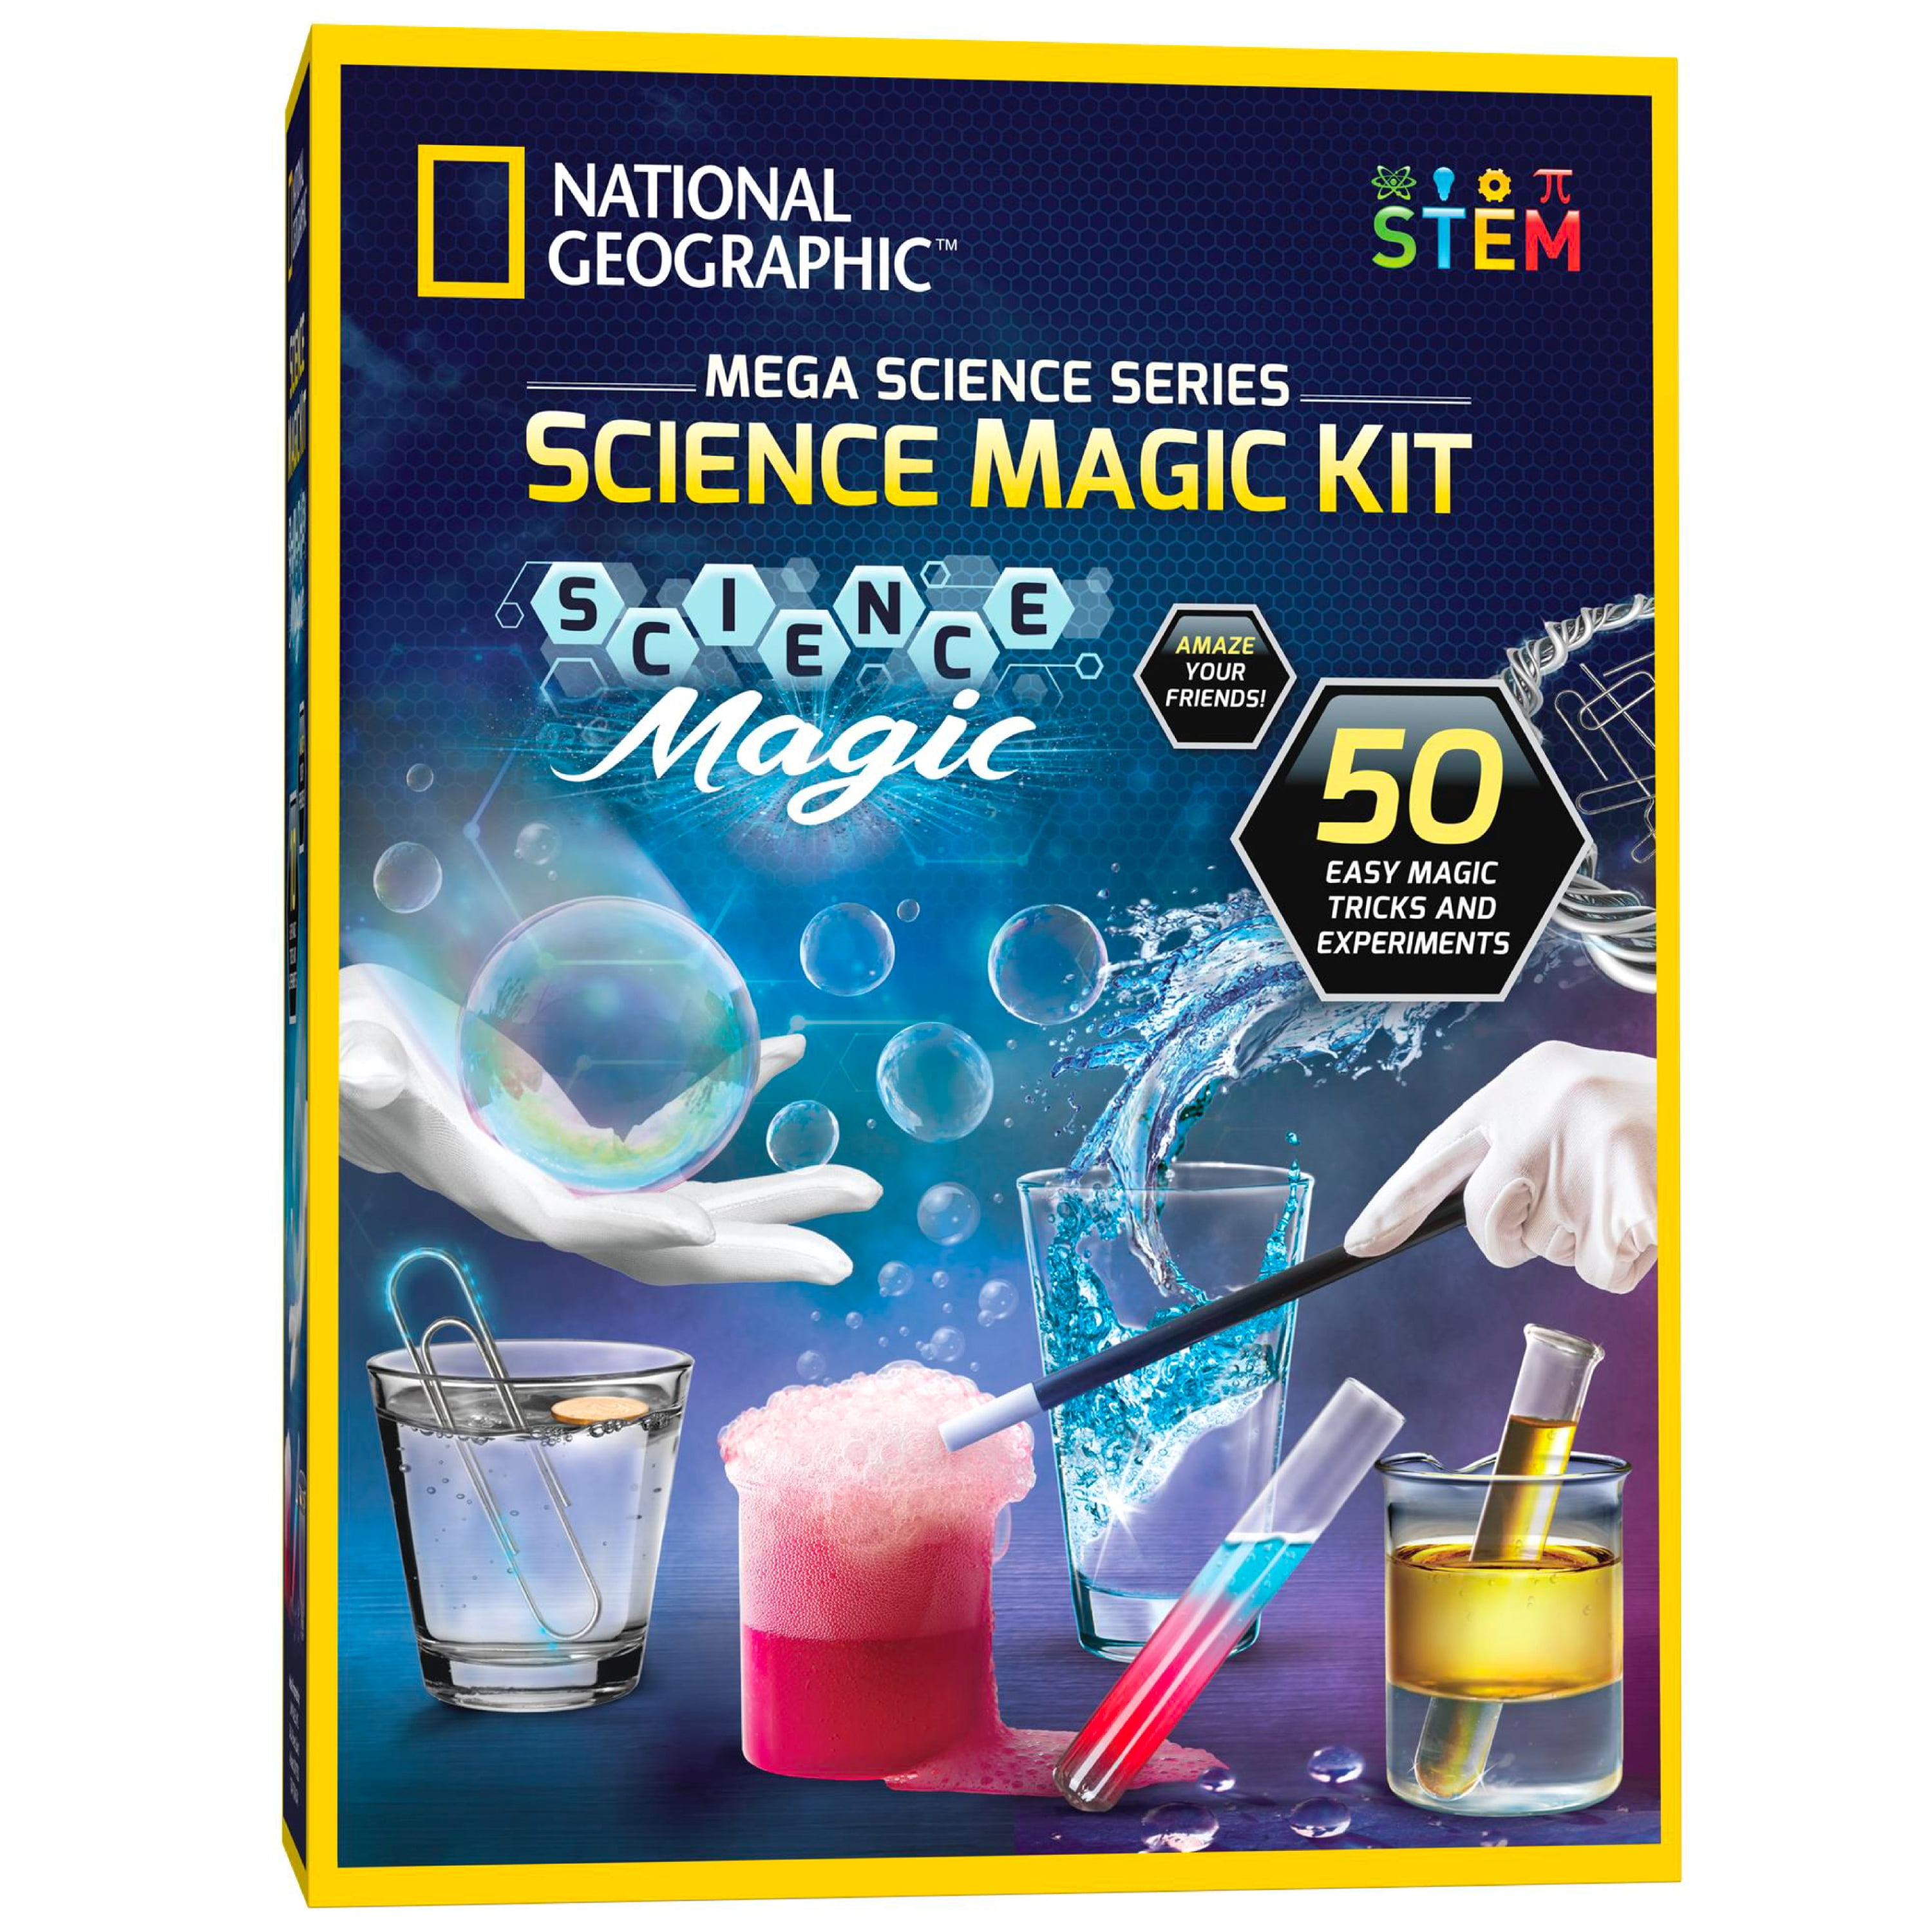 National Geographic's Mega Science STEM kits for kids are 30% off